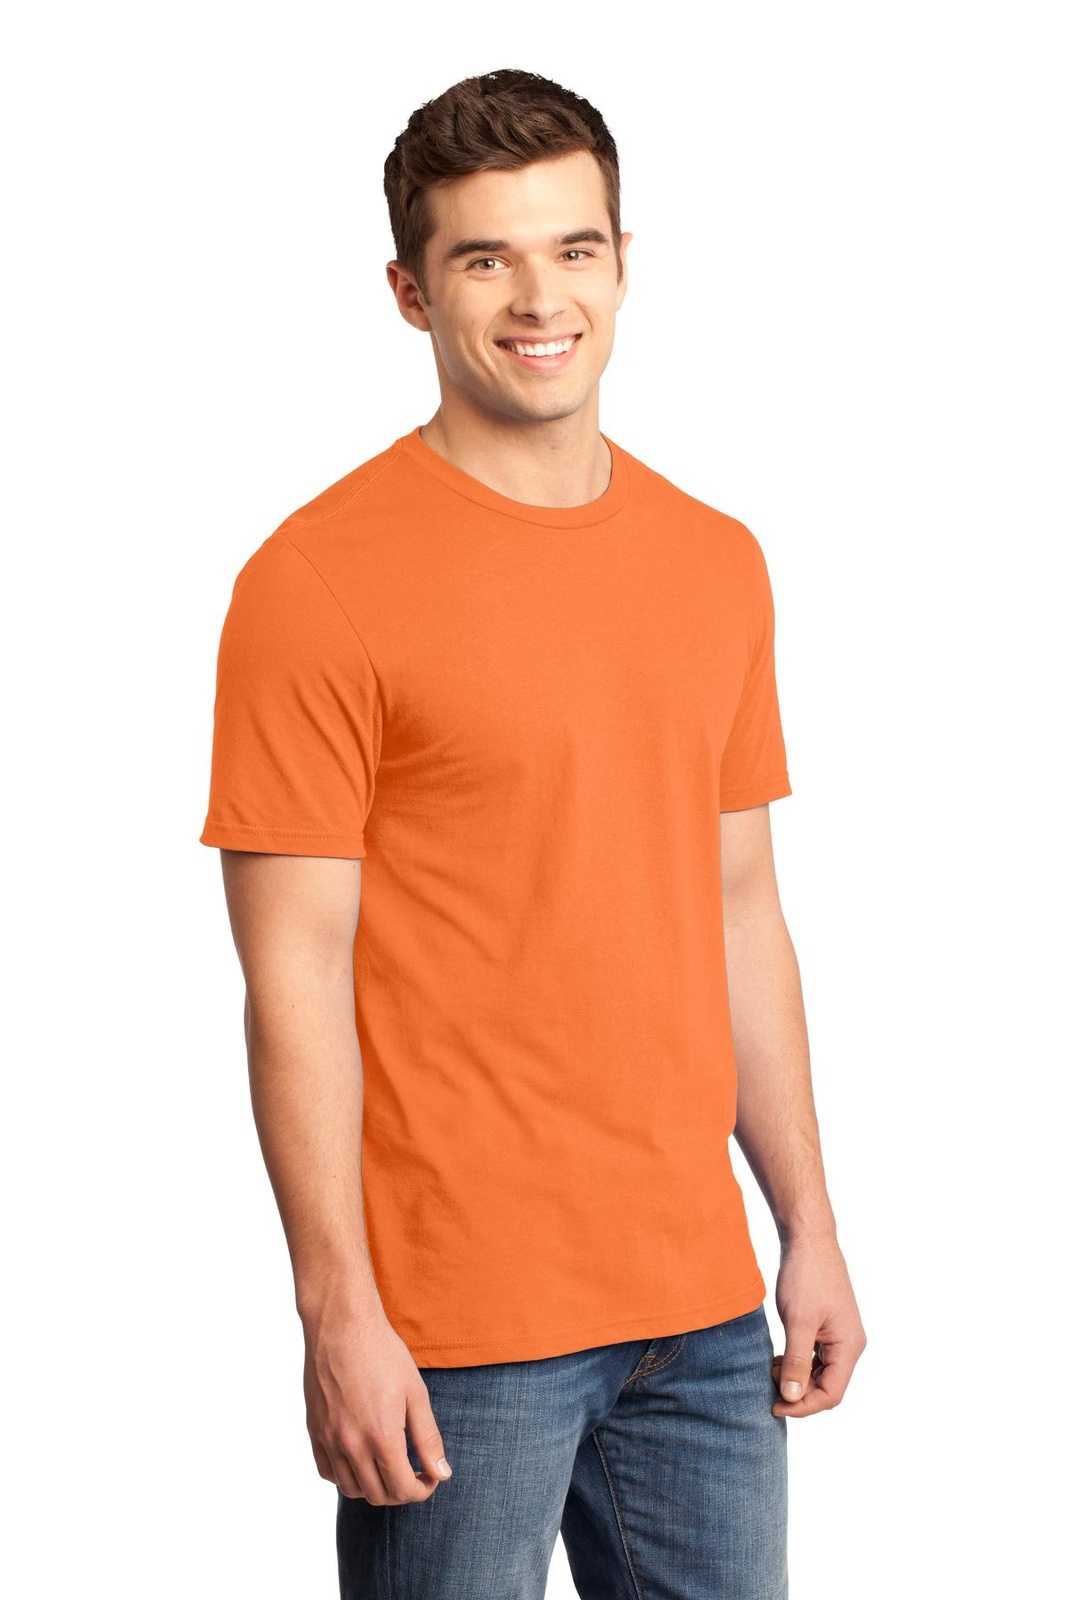 District DT6000 Very Important Tee - Orange - HIT a Double - 4